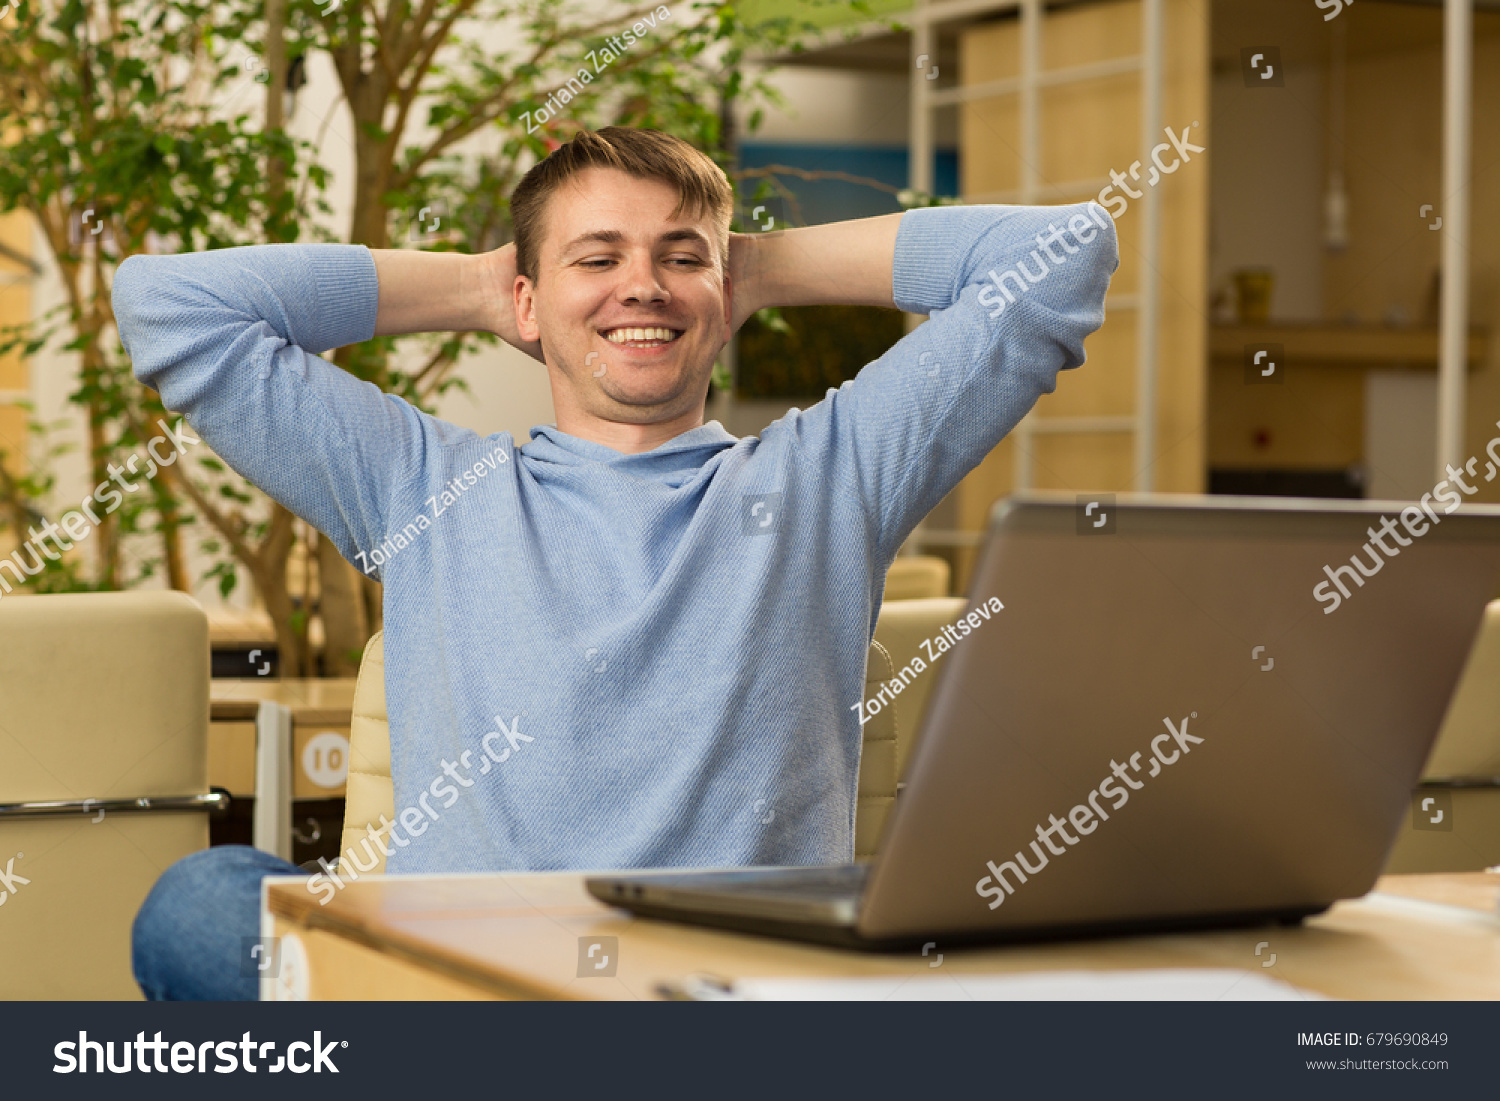 Happy young businessman sitting relaxed at his workplace smiling joyfully after finishing project at the end of the working day technology laptop online positivity confidence success achievement #679690849